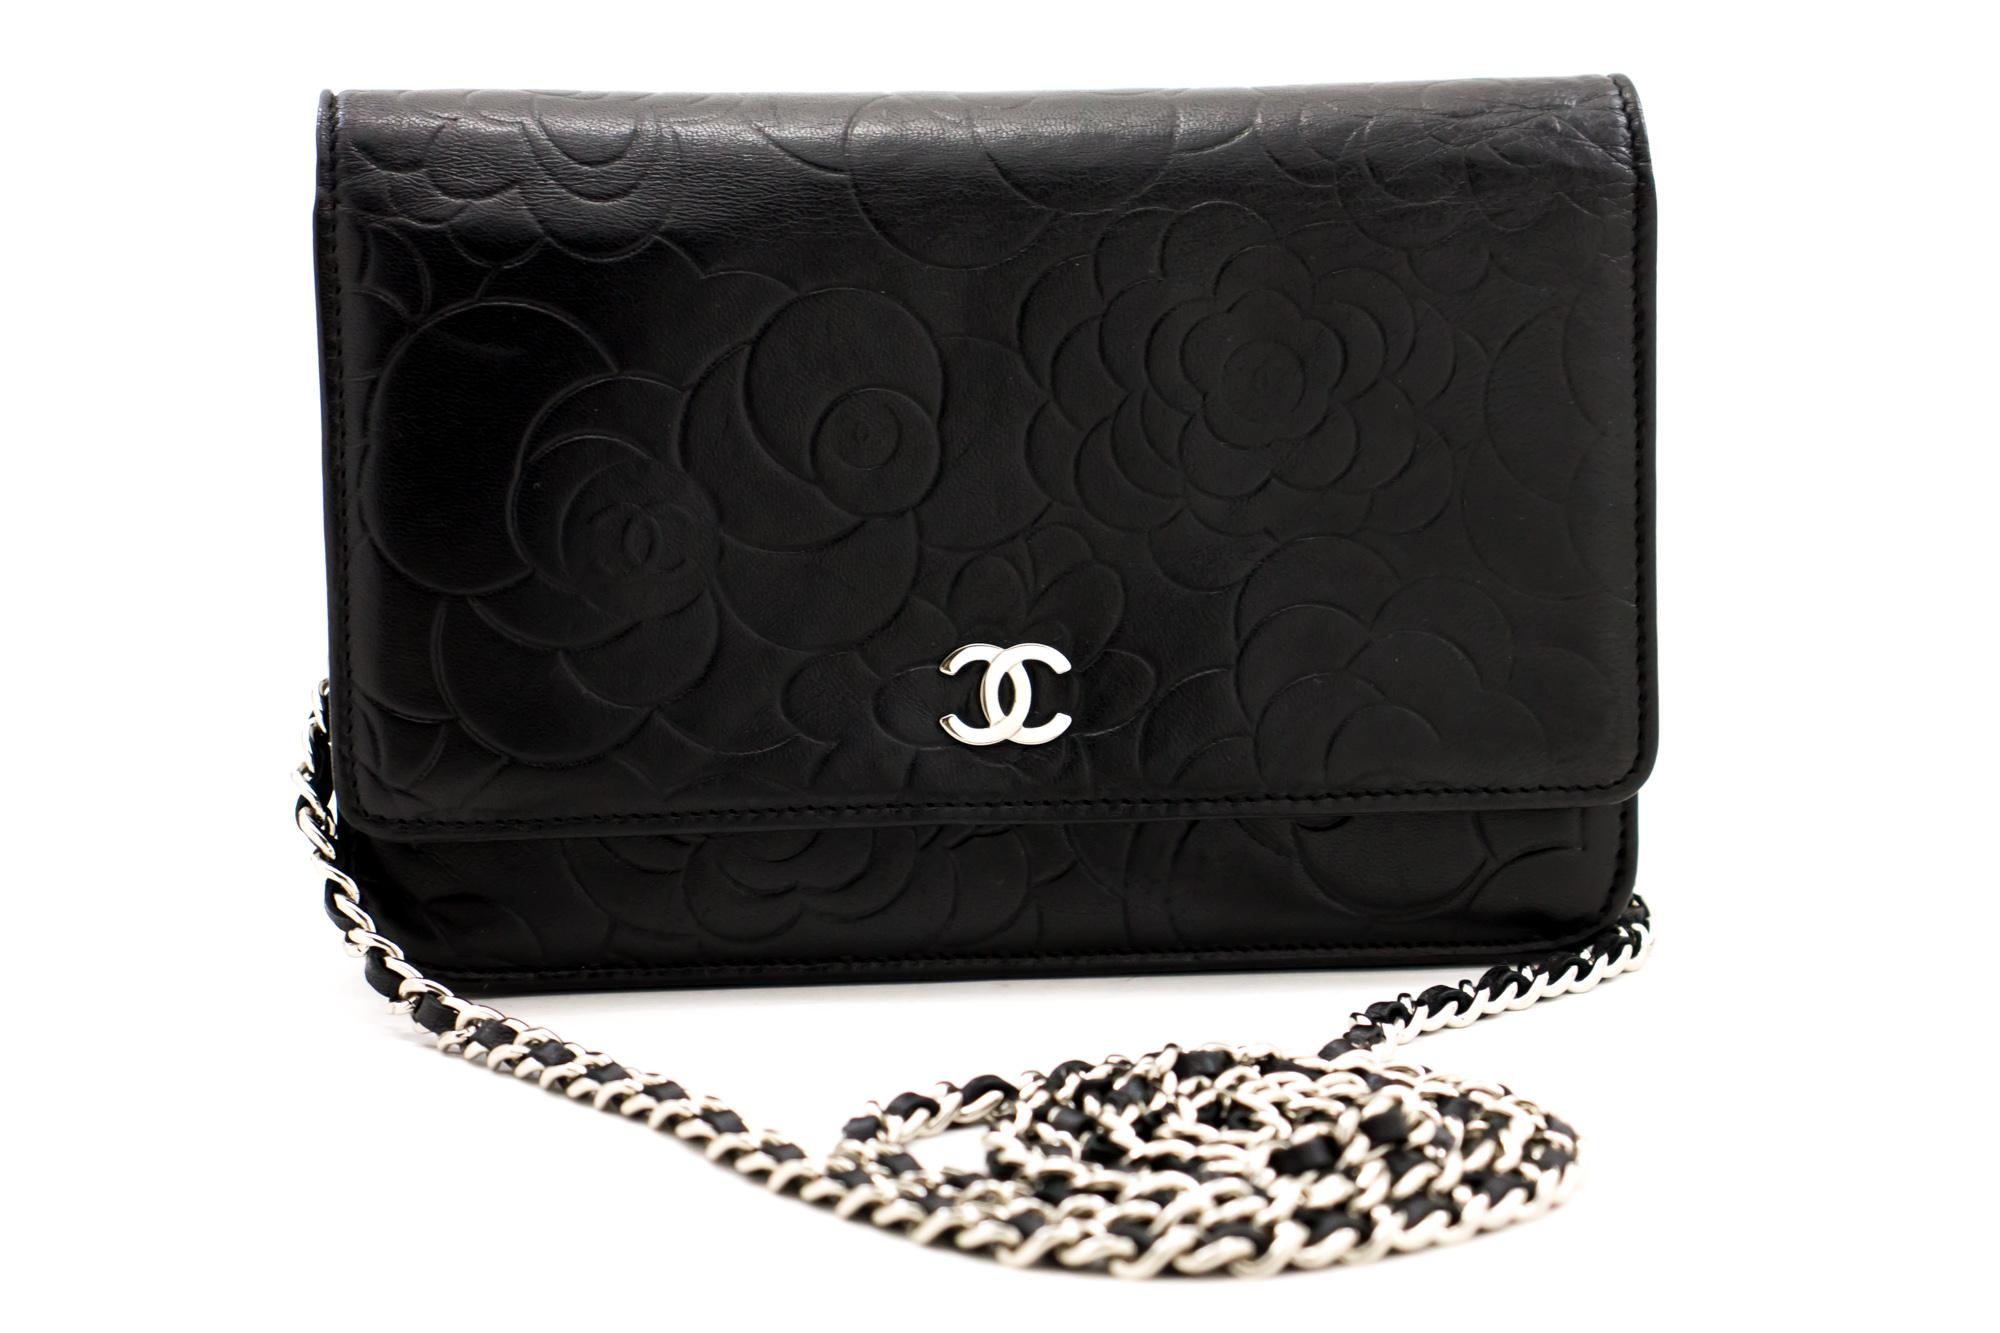 An authentic CHANEL Black Camellia Embossed Wallet On Chain WOC Shoulder Bag. The color is Black. The outside material is Leather. The pattern is Embossed. This item is Contemporary. The year of manufacture would be 2009.
Conditions &